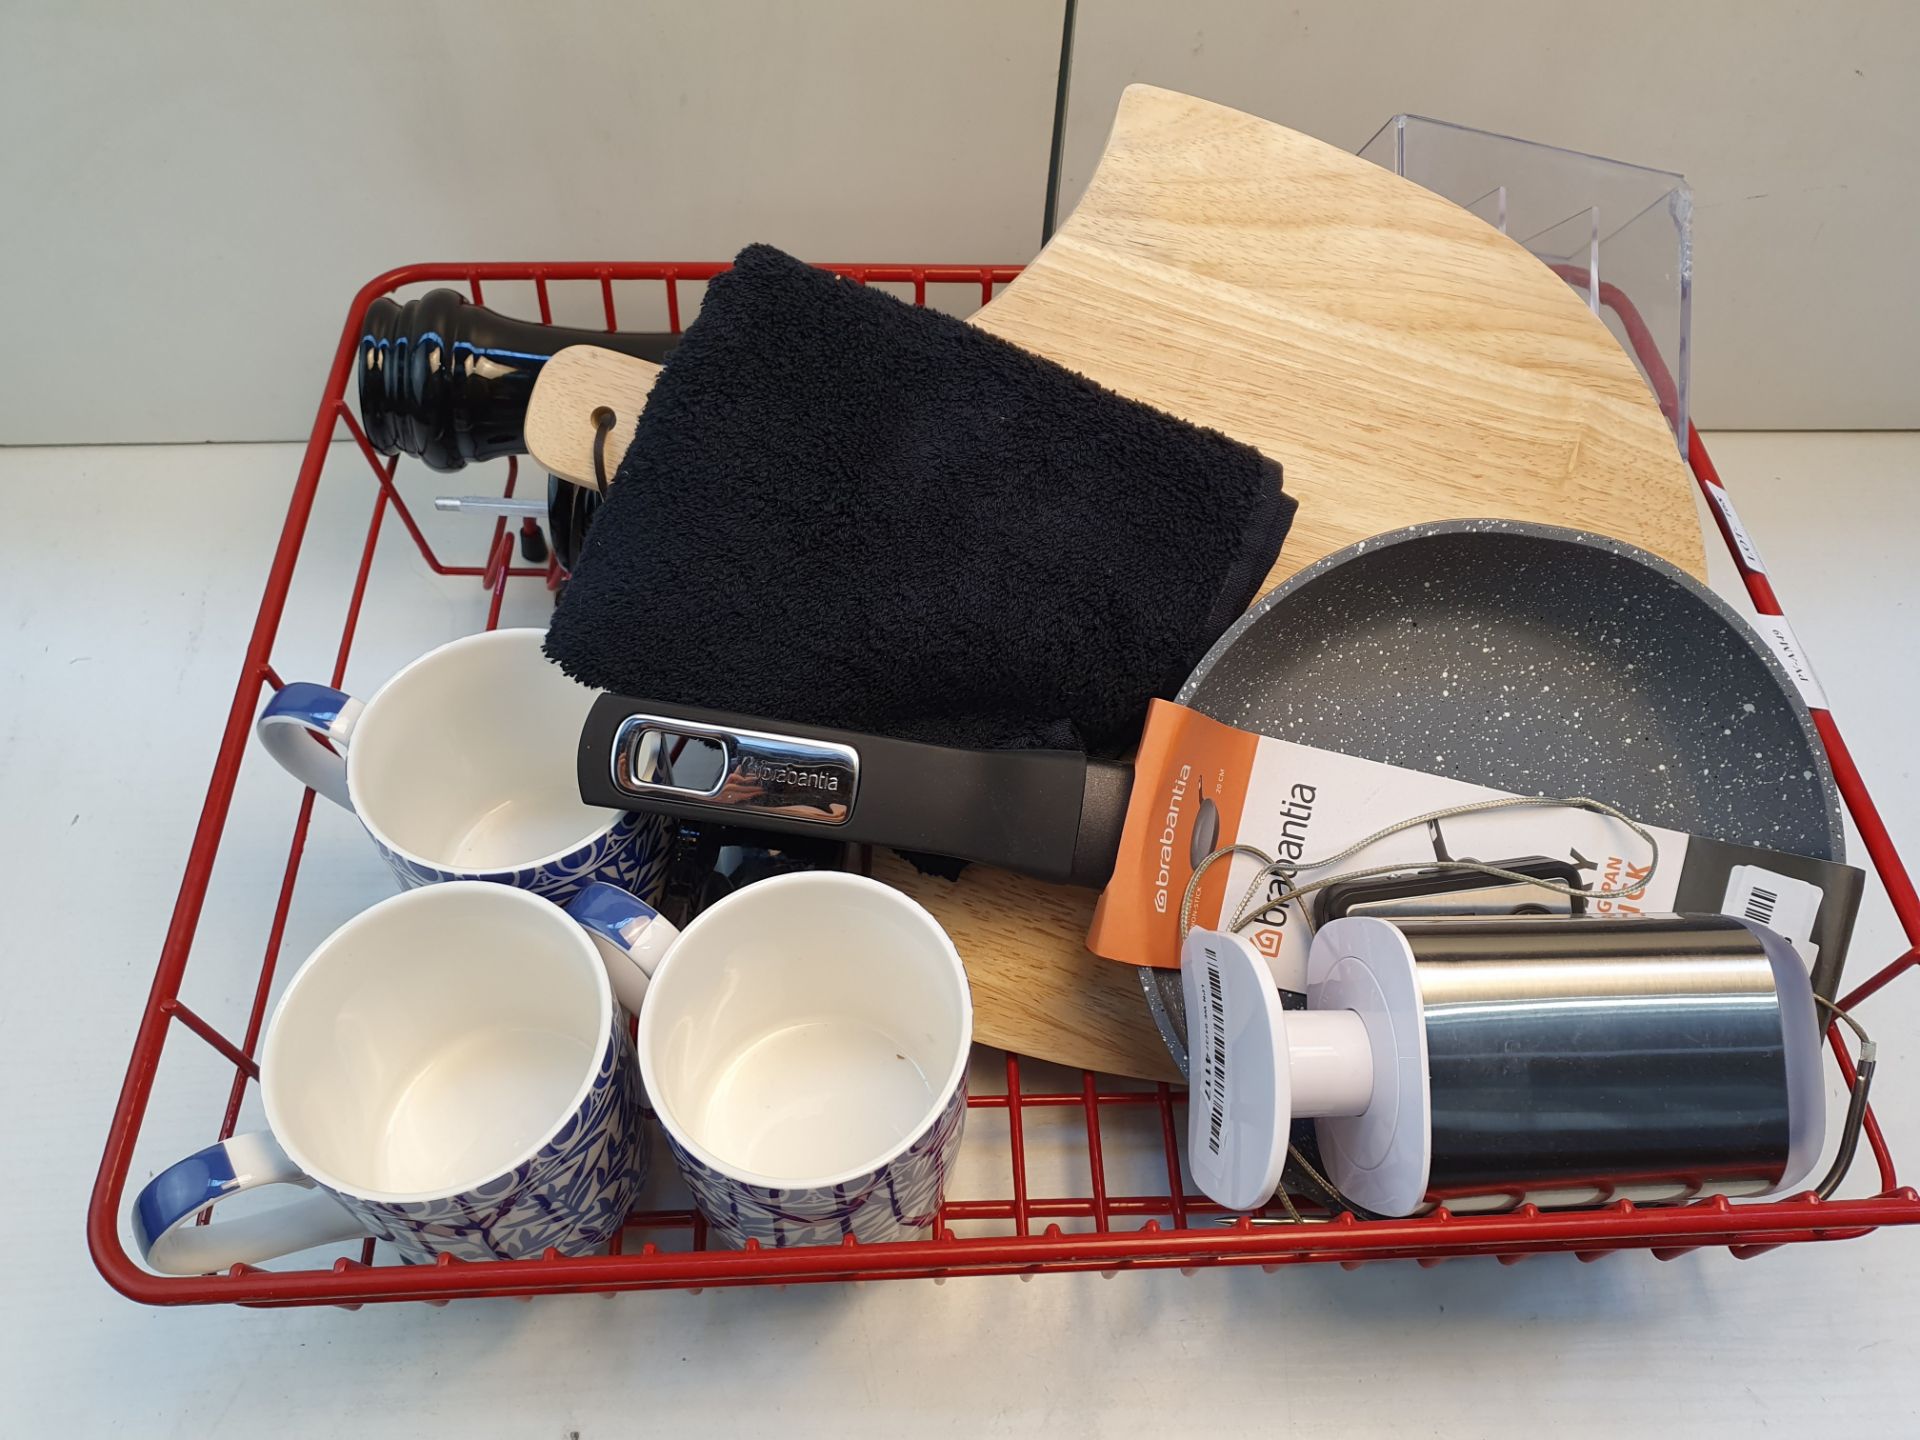 LARGE AMOUNT OF ASSORTED ITEMS TO INCLUDE BRABANTIA FRY PAN, CUPS, DISH RACK, SALT & PEPPER